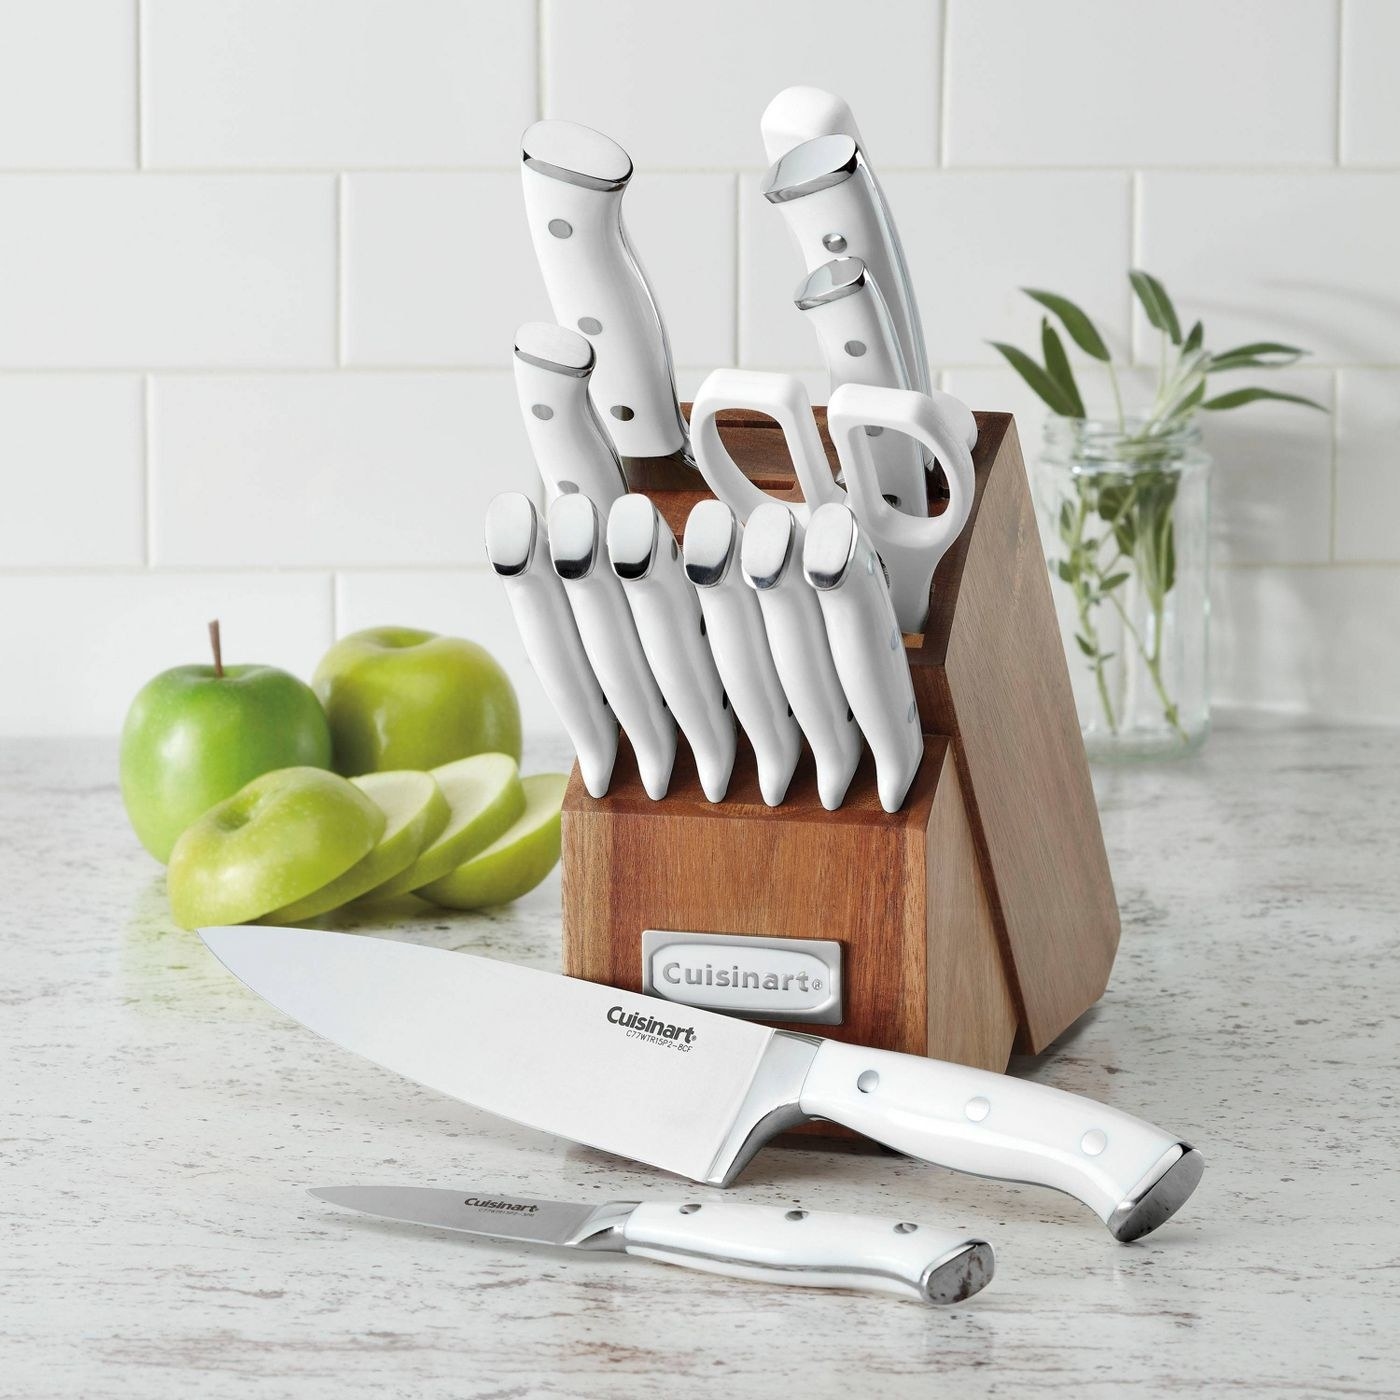 The knife set on a countertop